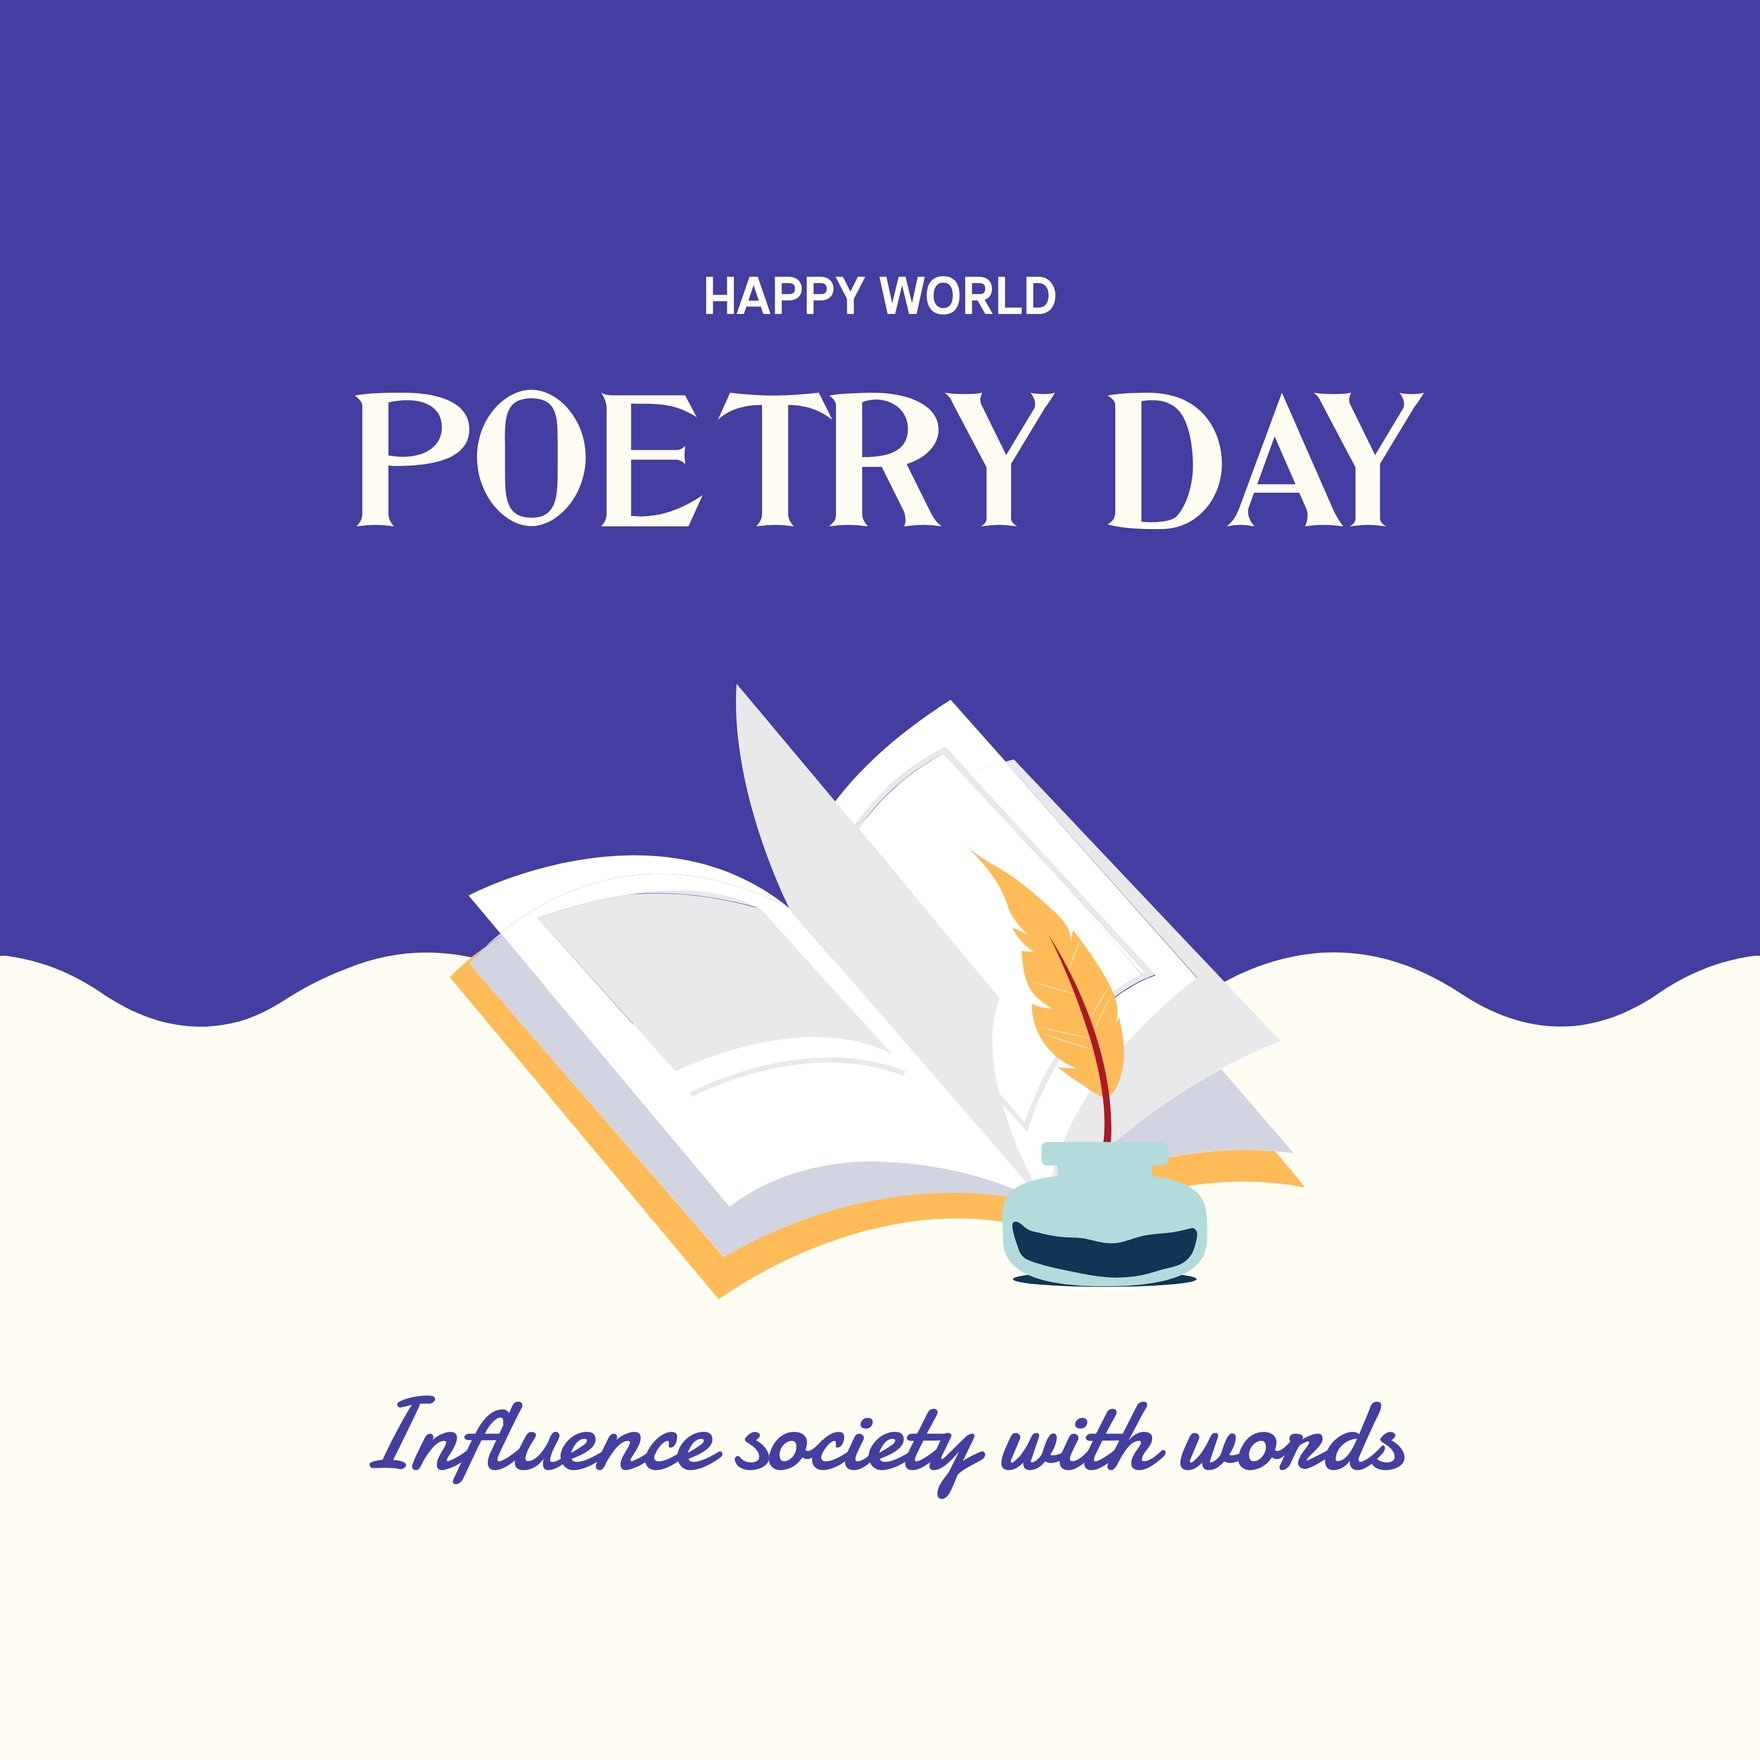 Free World Poetry Day Instagram Post in Illustrator, PSD, EPS, SVG, PNG, JPEG